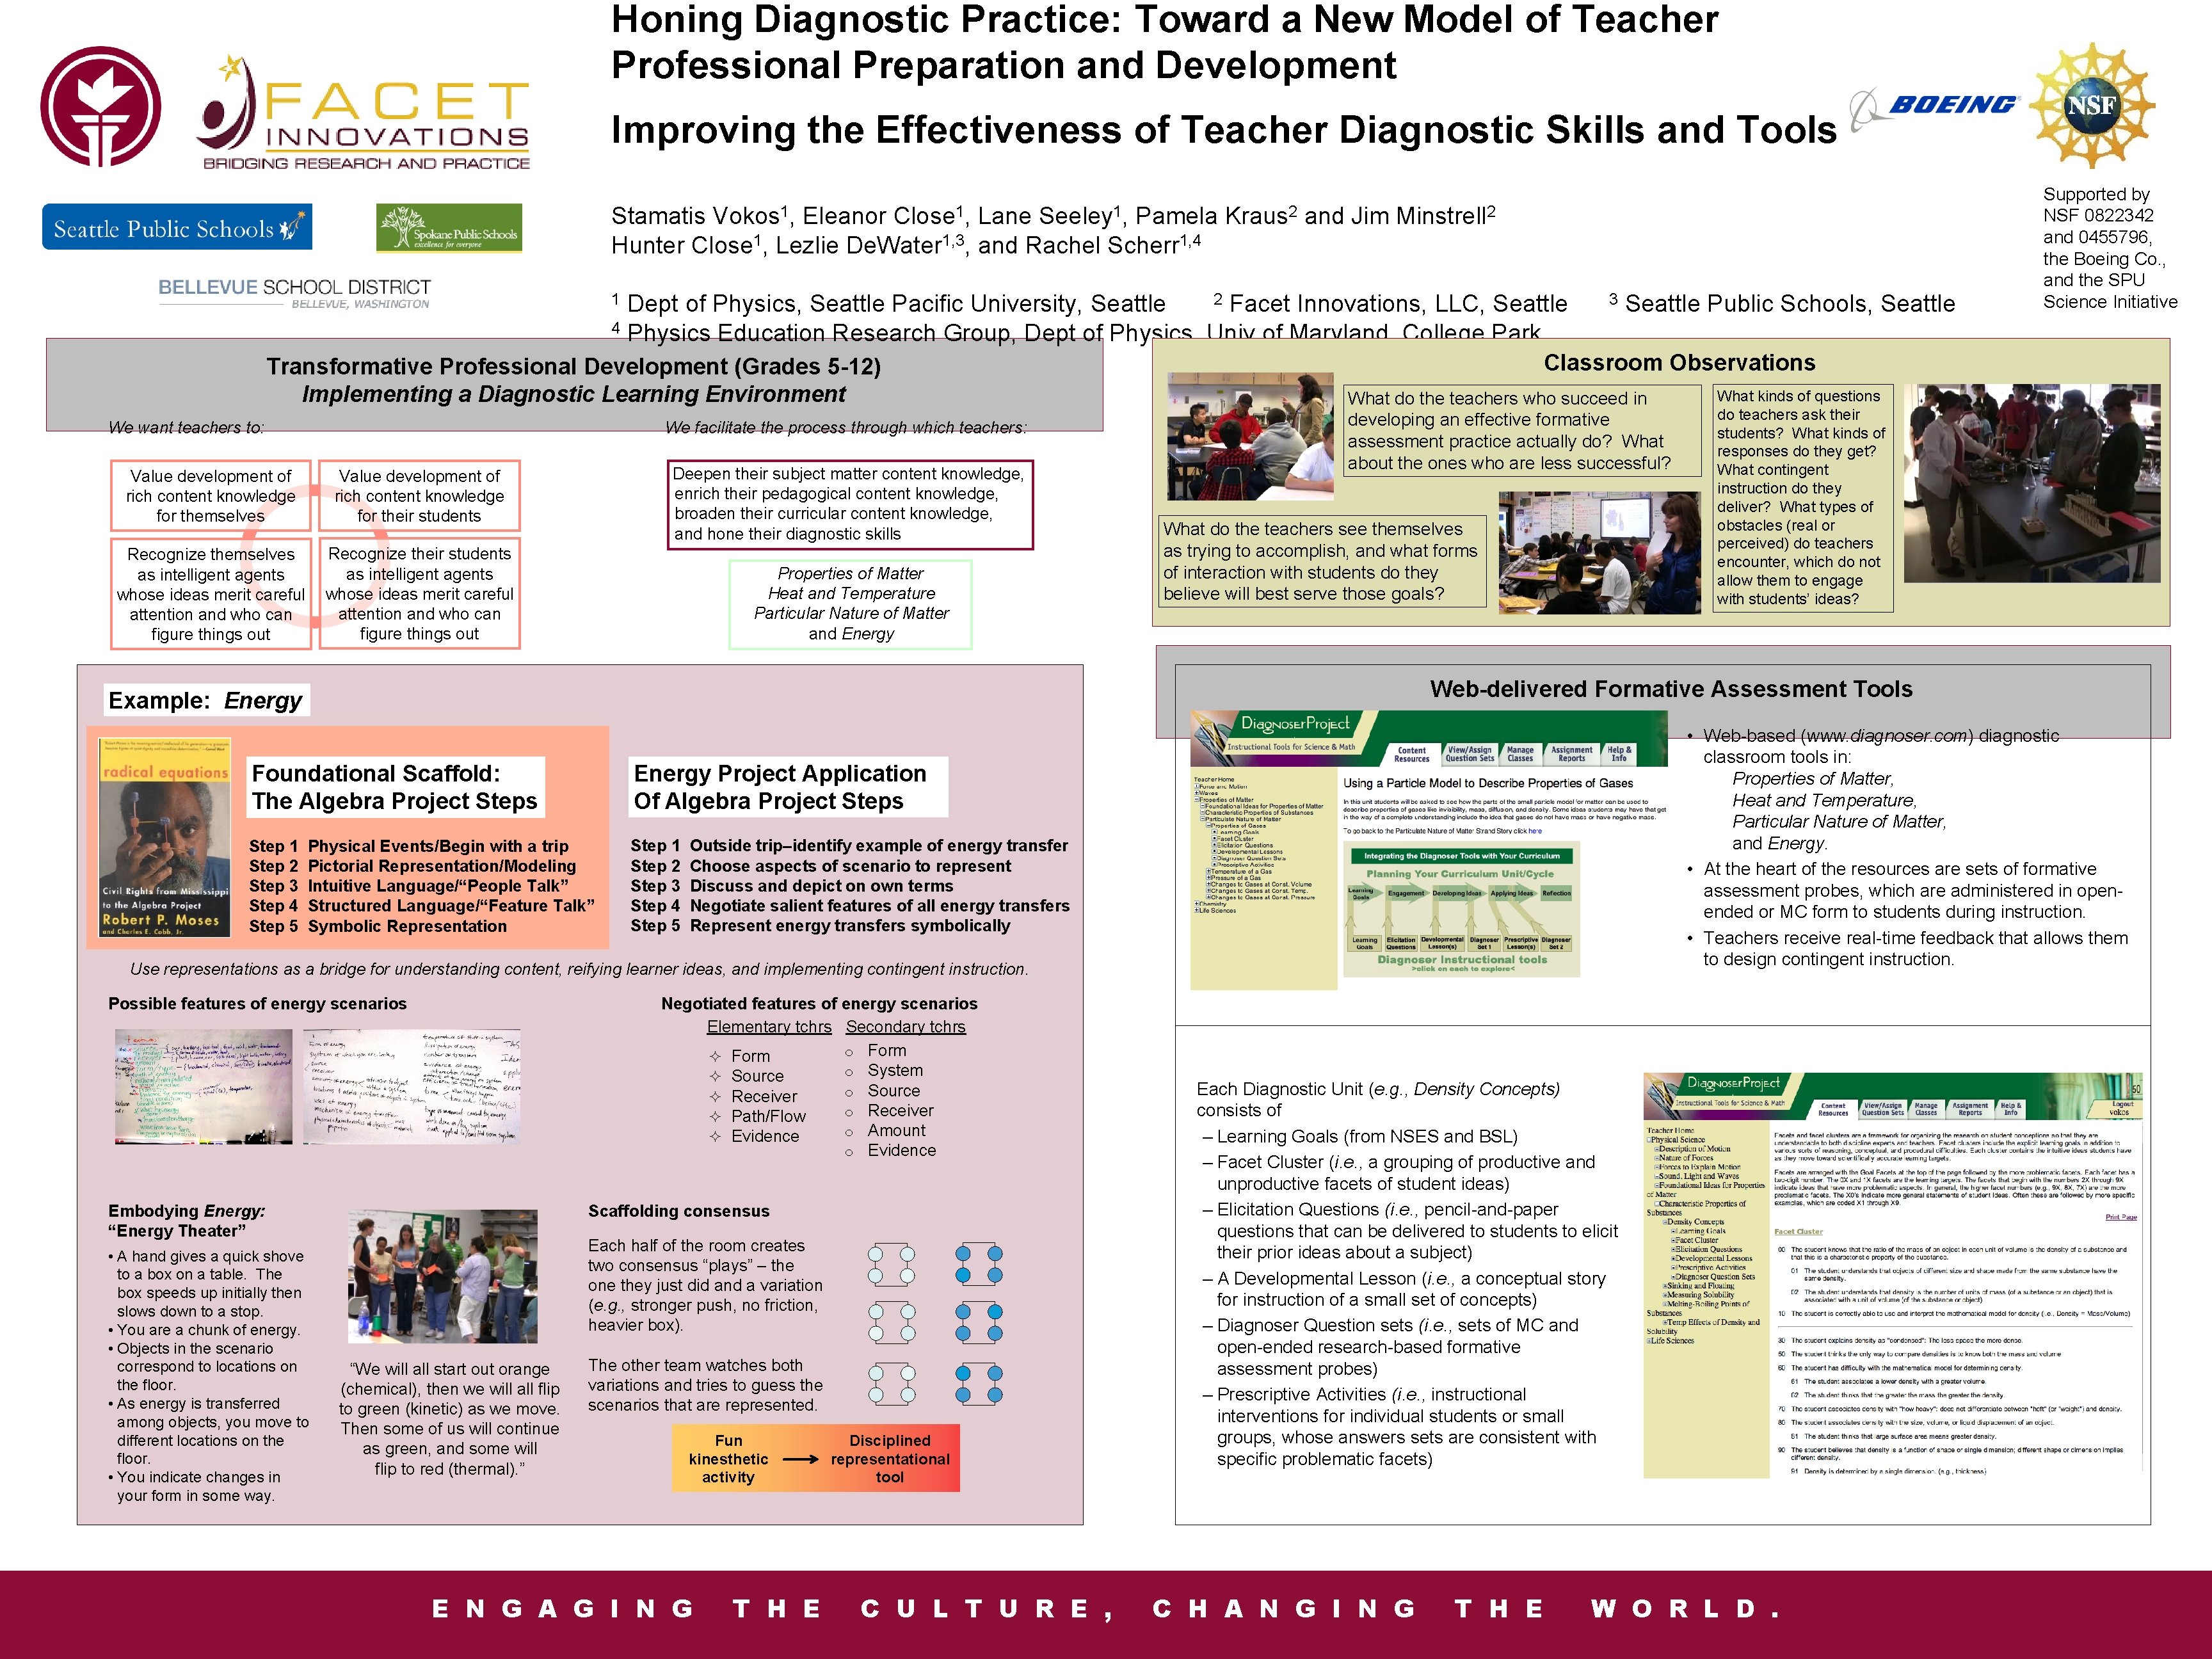 Honing Diagnostic Practice: Toward a New Model of Teacher Professional Preparation and Development Improving